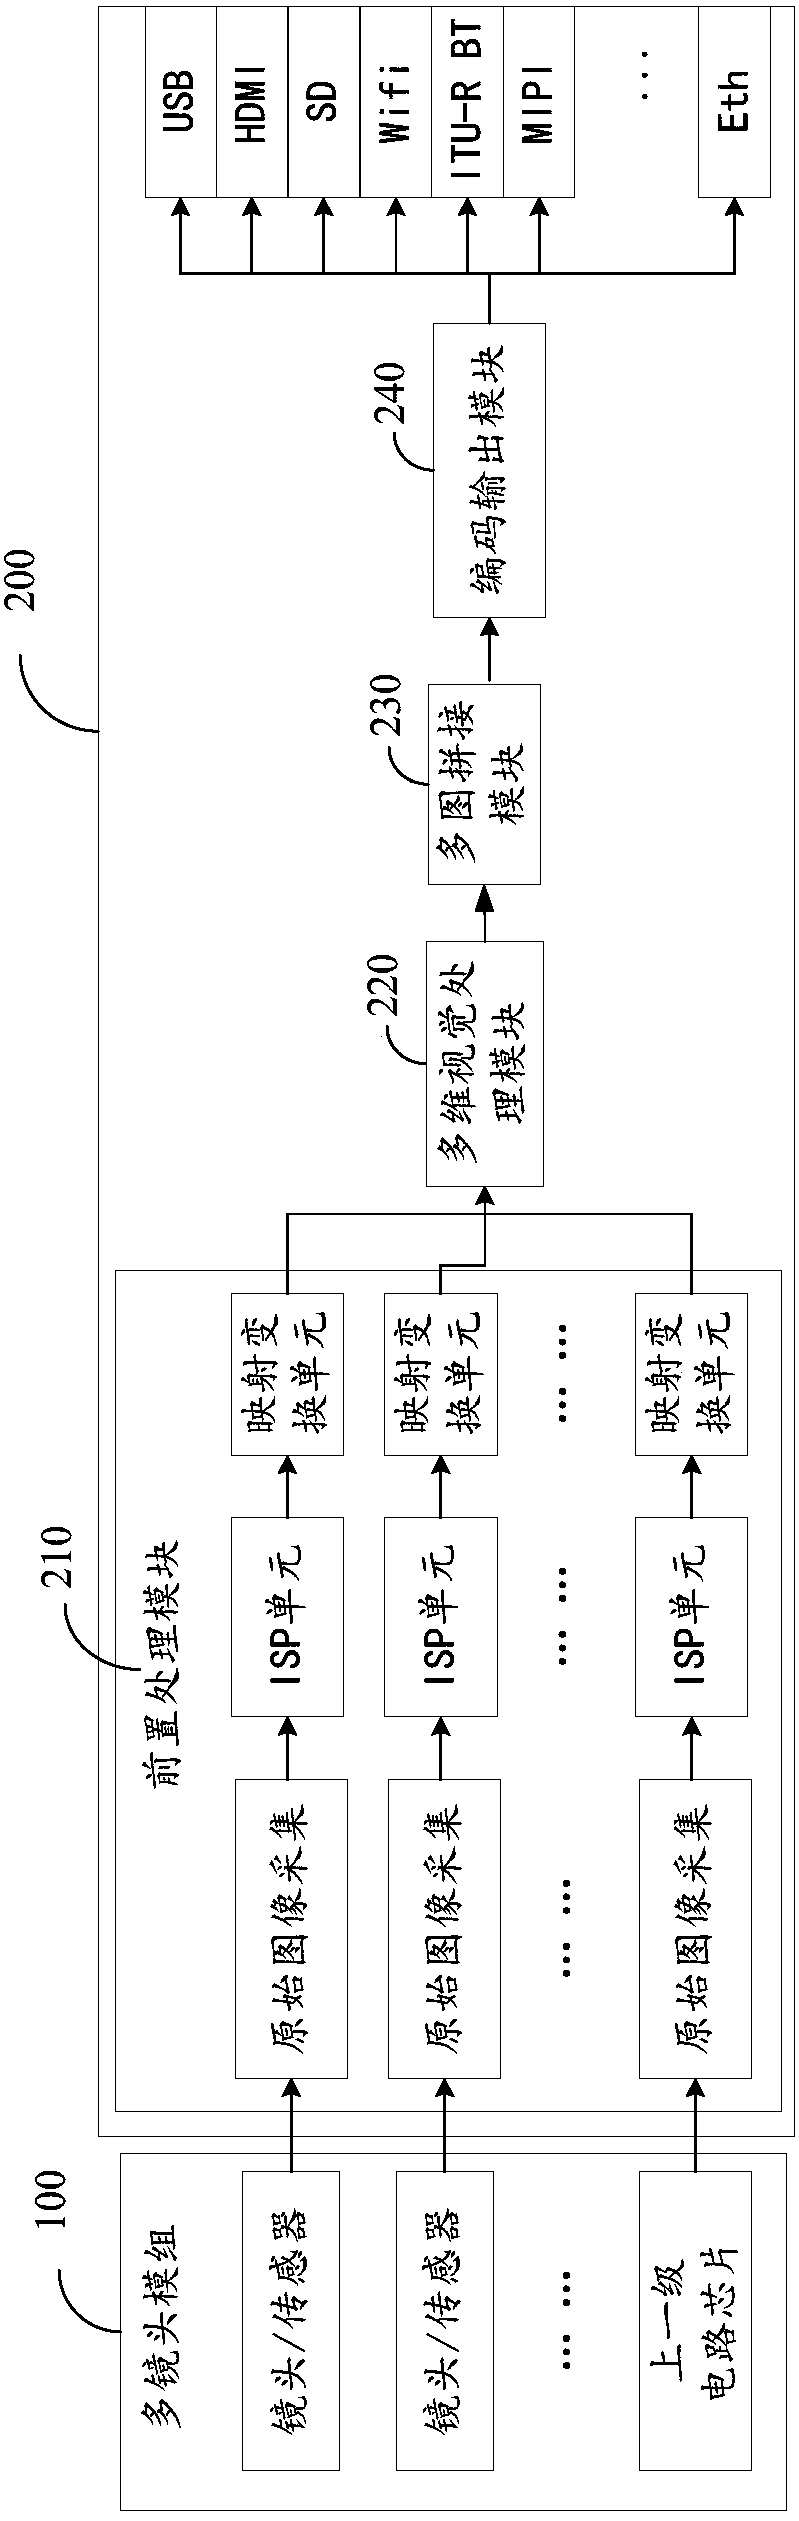 Multi-lens image stitching device and method